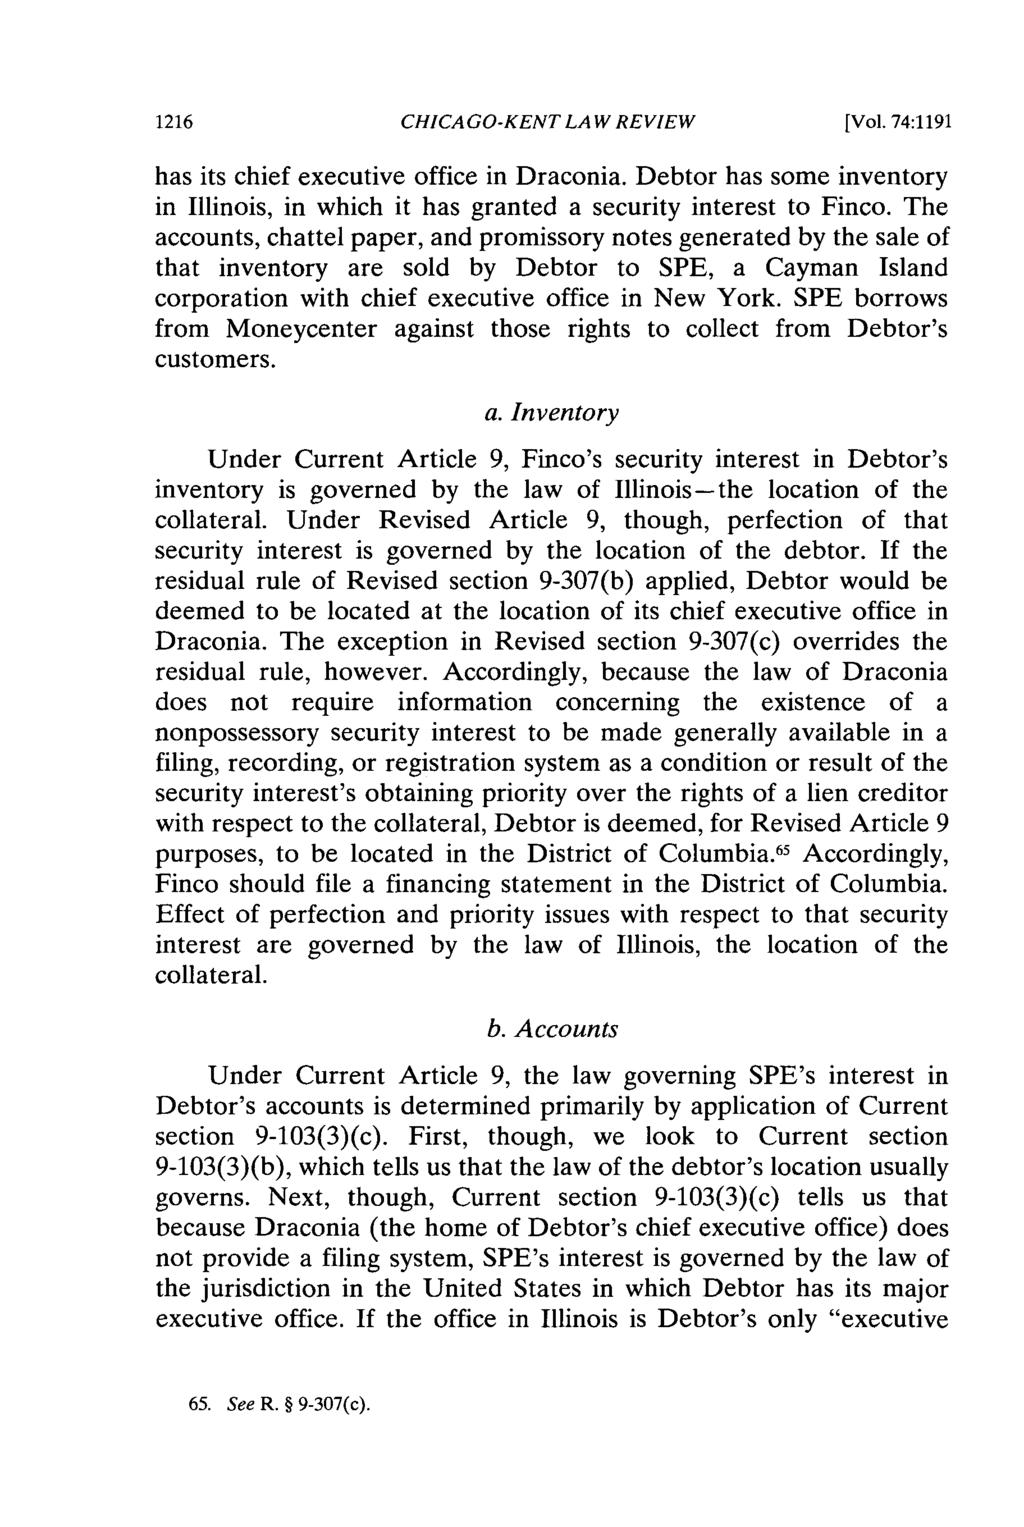 CHICAGO-KENT LAW REVIEW [Vol. 74:1191 has its chief executive office in Draconia. Debtor has some inventory in Illinois, in which it has granted a security interest to Finco.